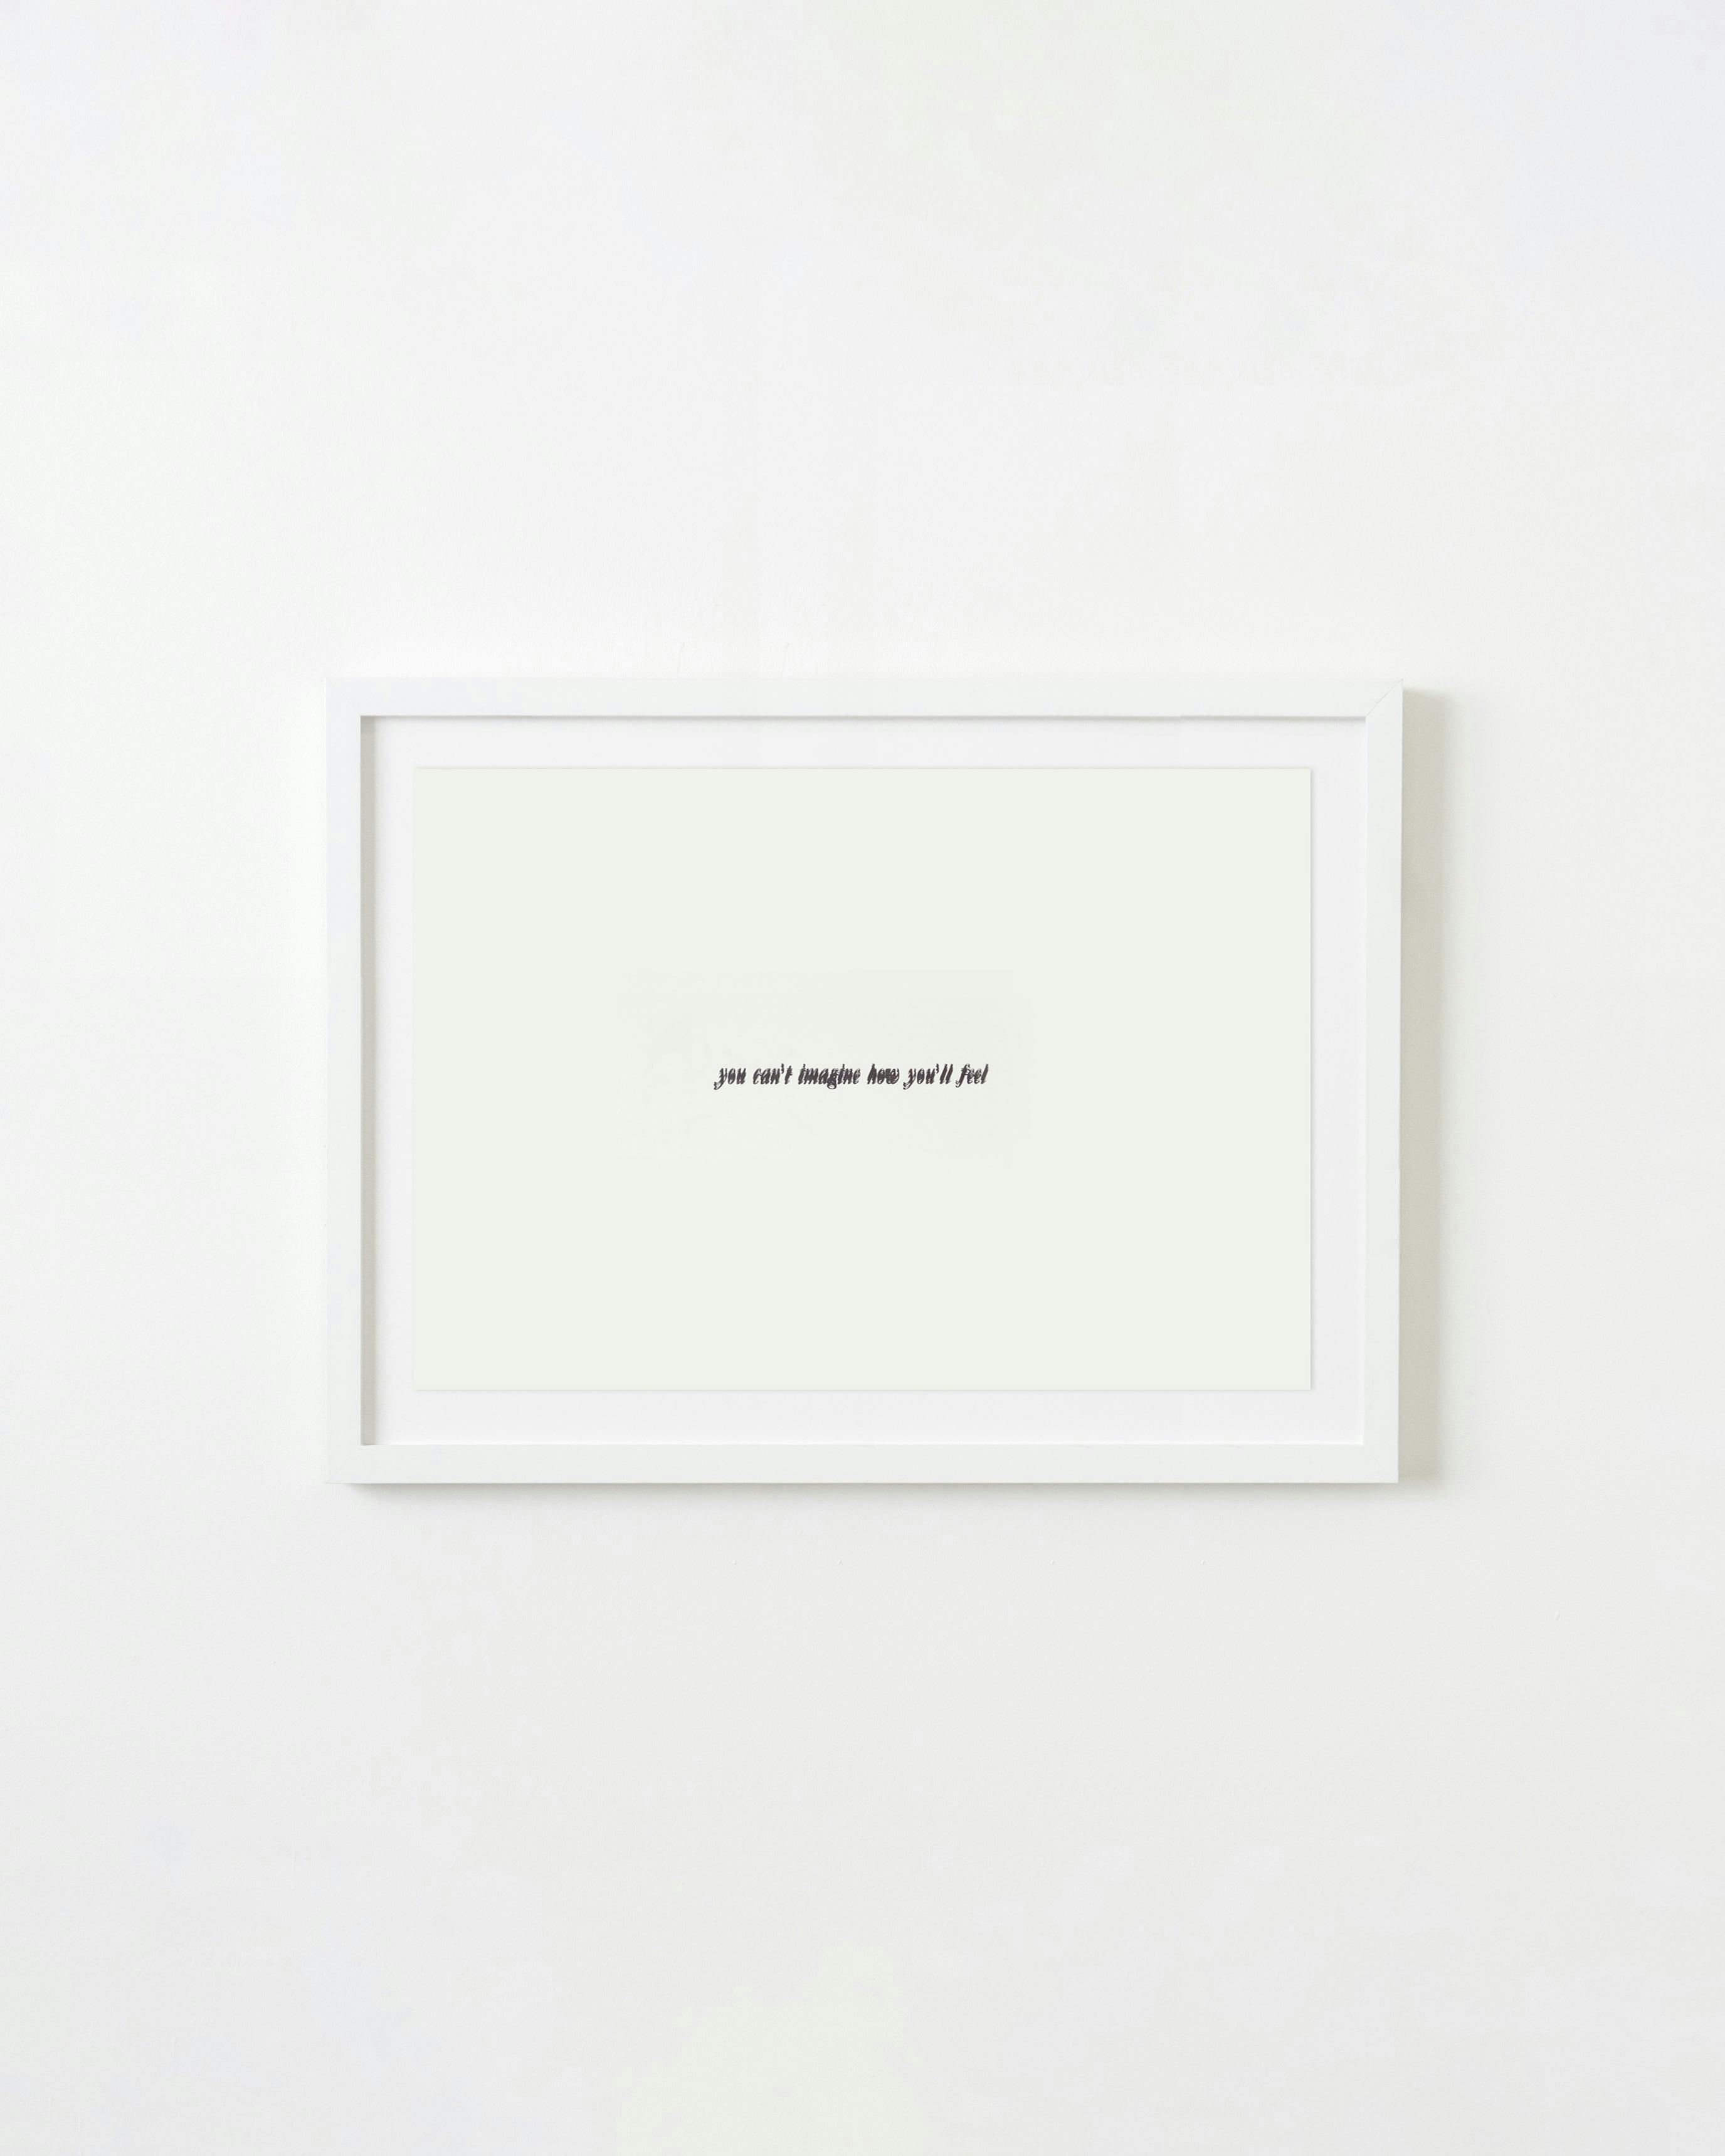 Print by Alyson Provax titled "Untitled (you can't imagine how you'll feel)".